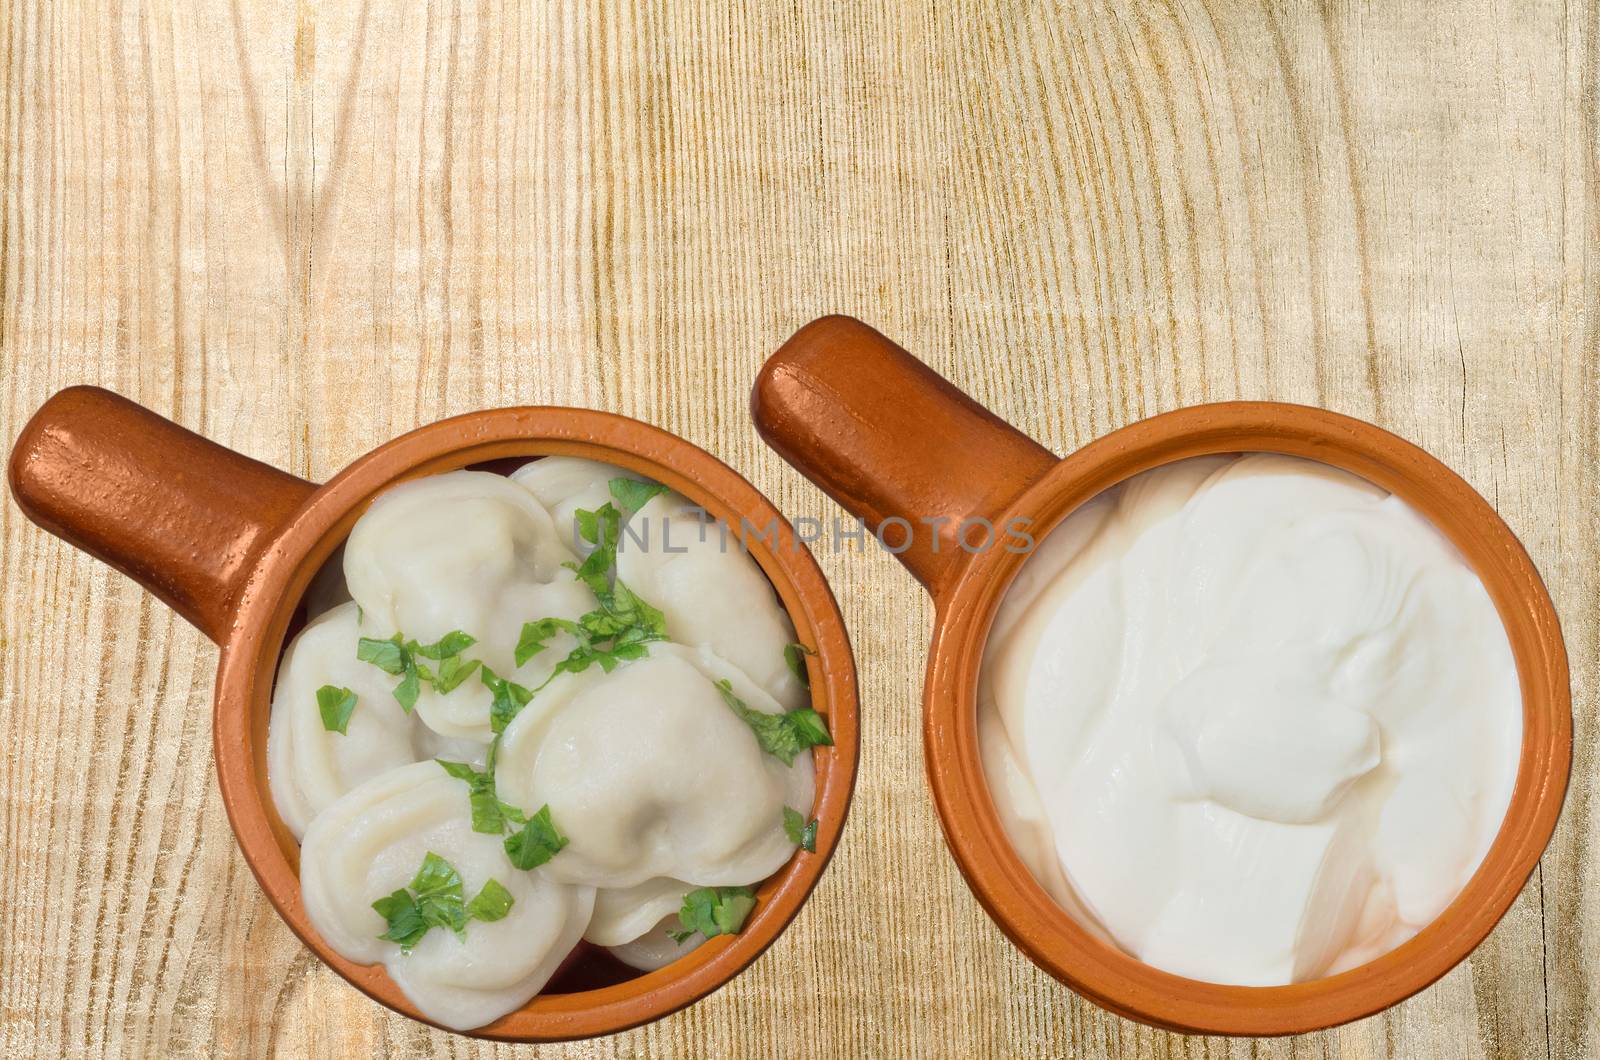 Boiled dumplings and sour cream in the dishes by Gaina